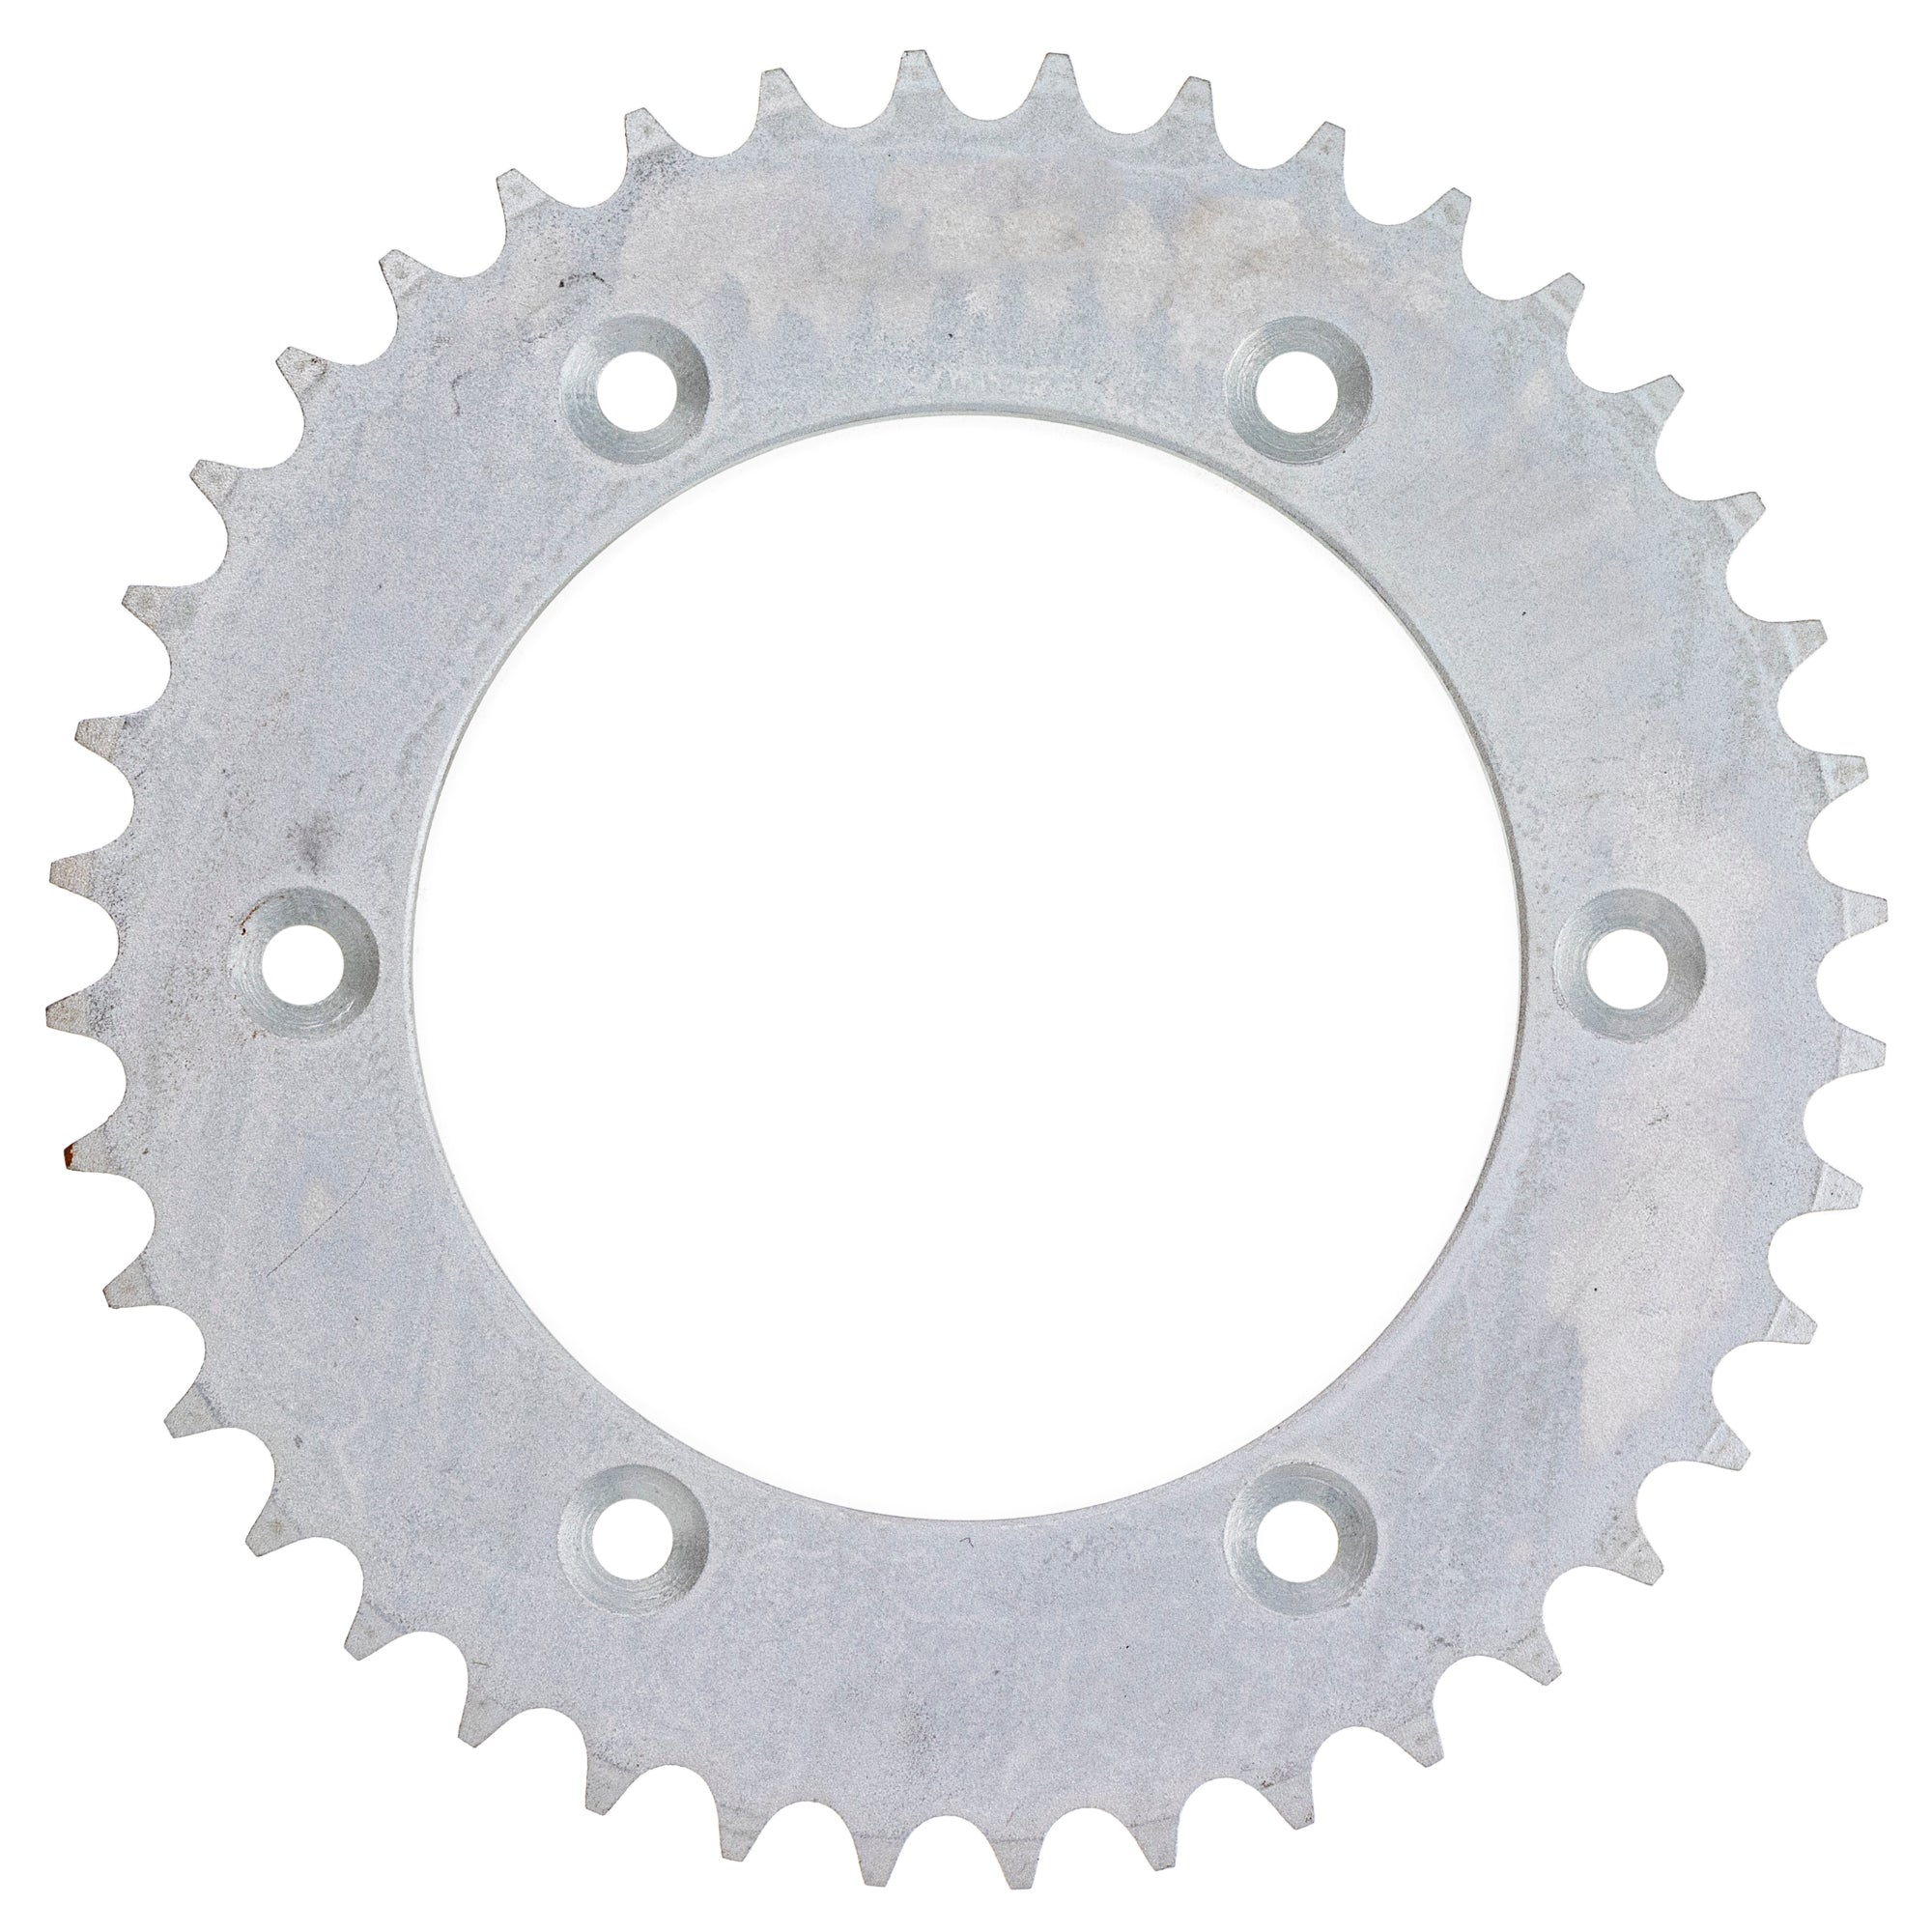 520 Pitch Front 13T Rear 40T Drive Sprocket Kit for KTM 250 300 EXC